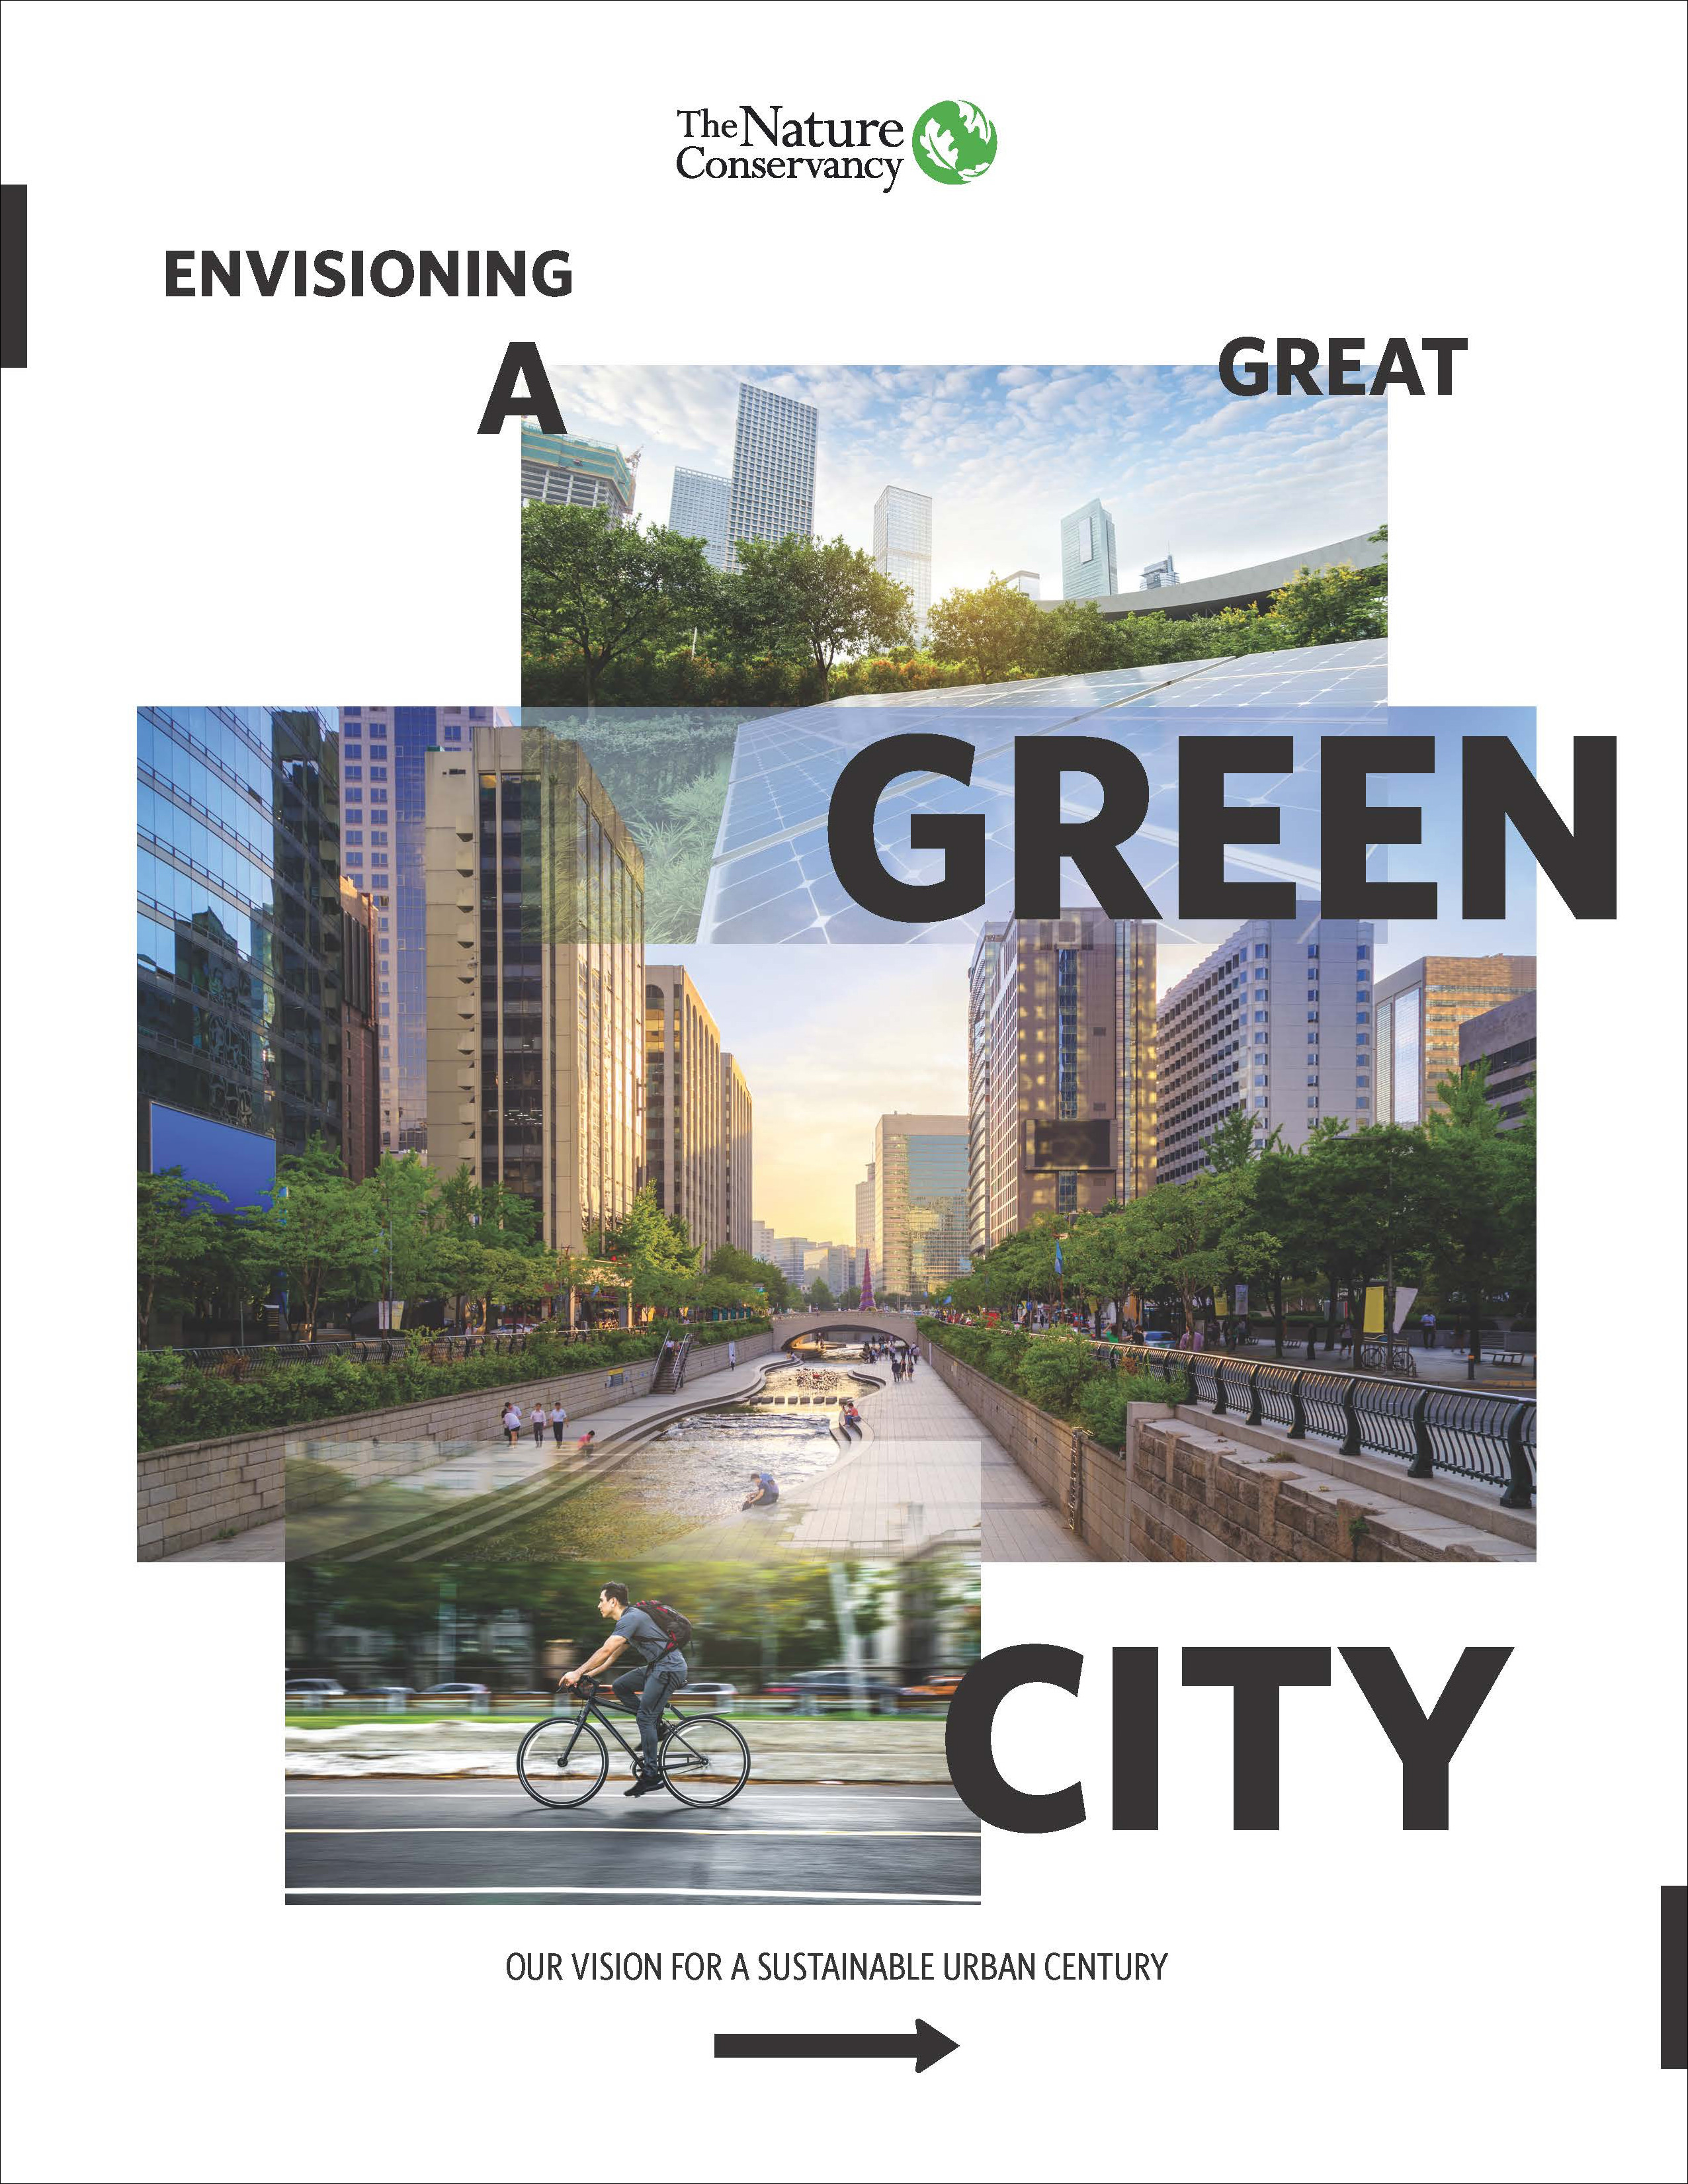 Envisioning a Great Green City